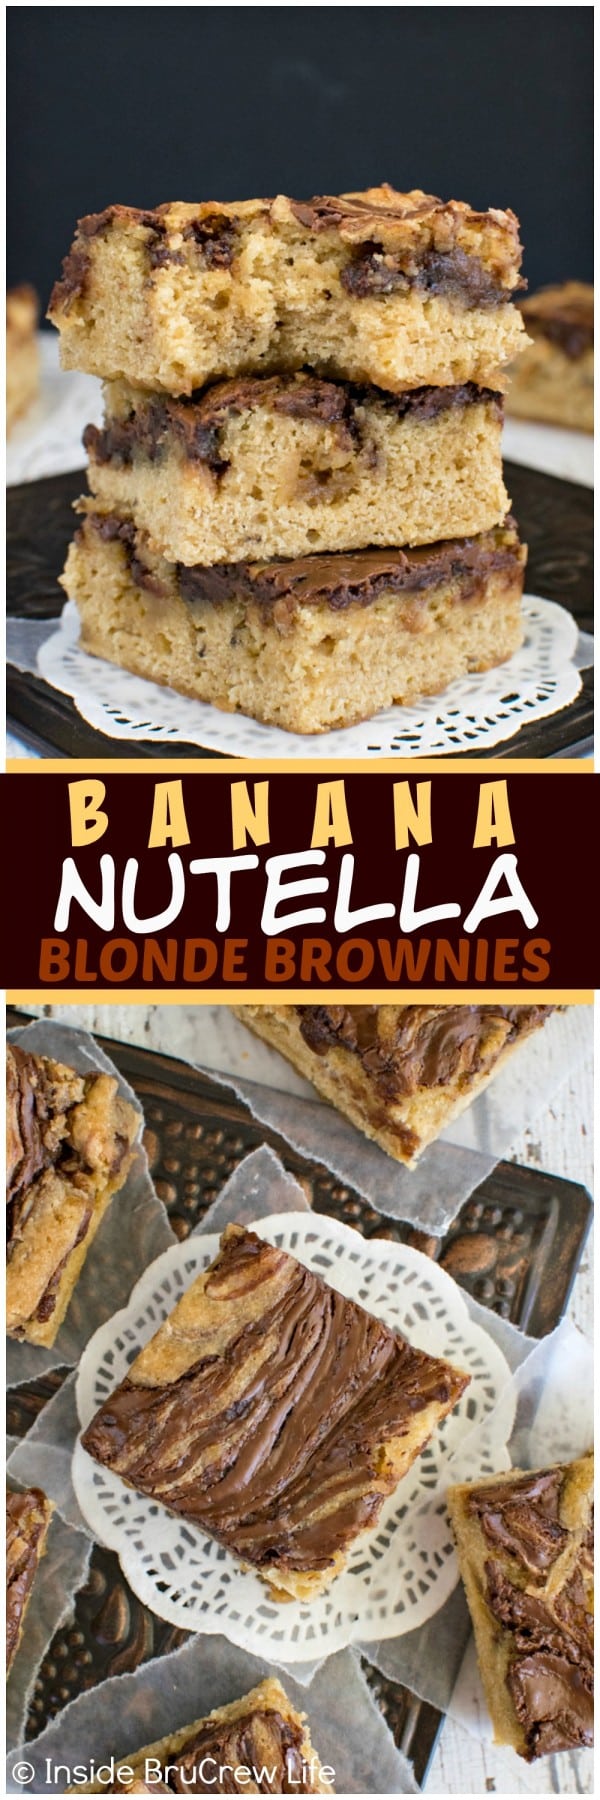 Banana Nutella Blonde Brownies - swirls of chocolate will make these soft bars your new favorite way to use up bananas! Awesome dessert recipe!